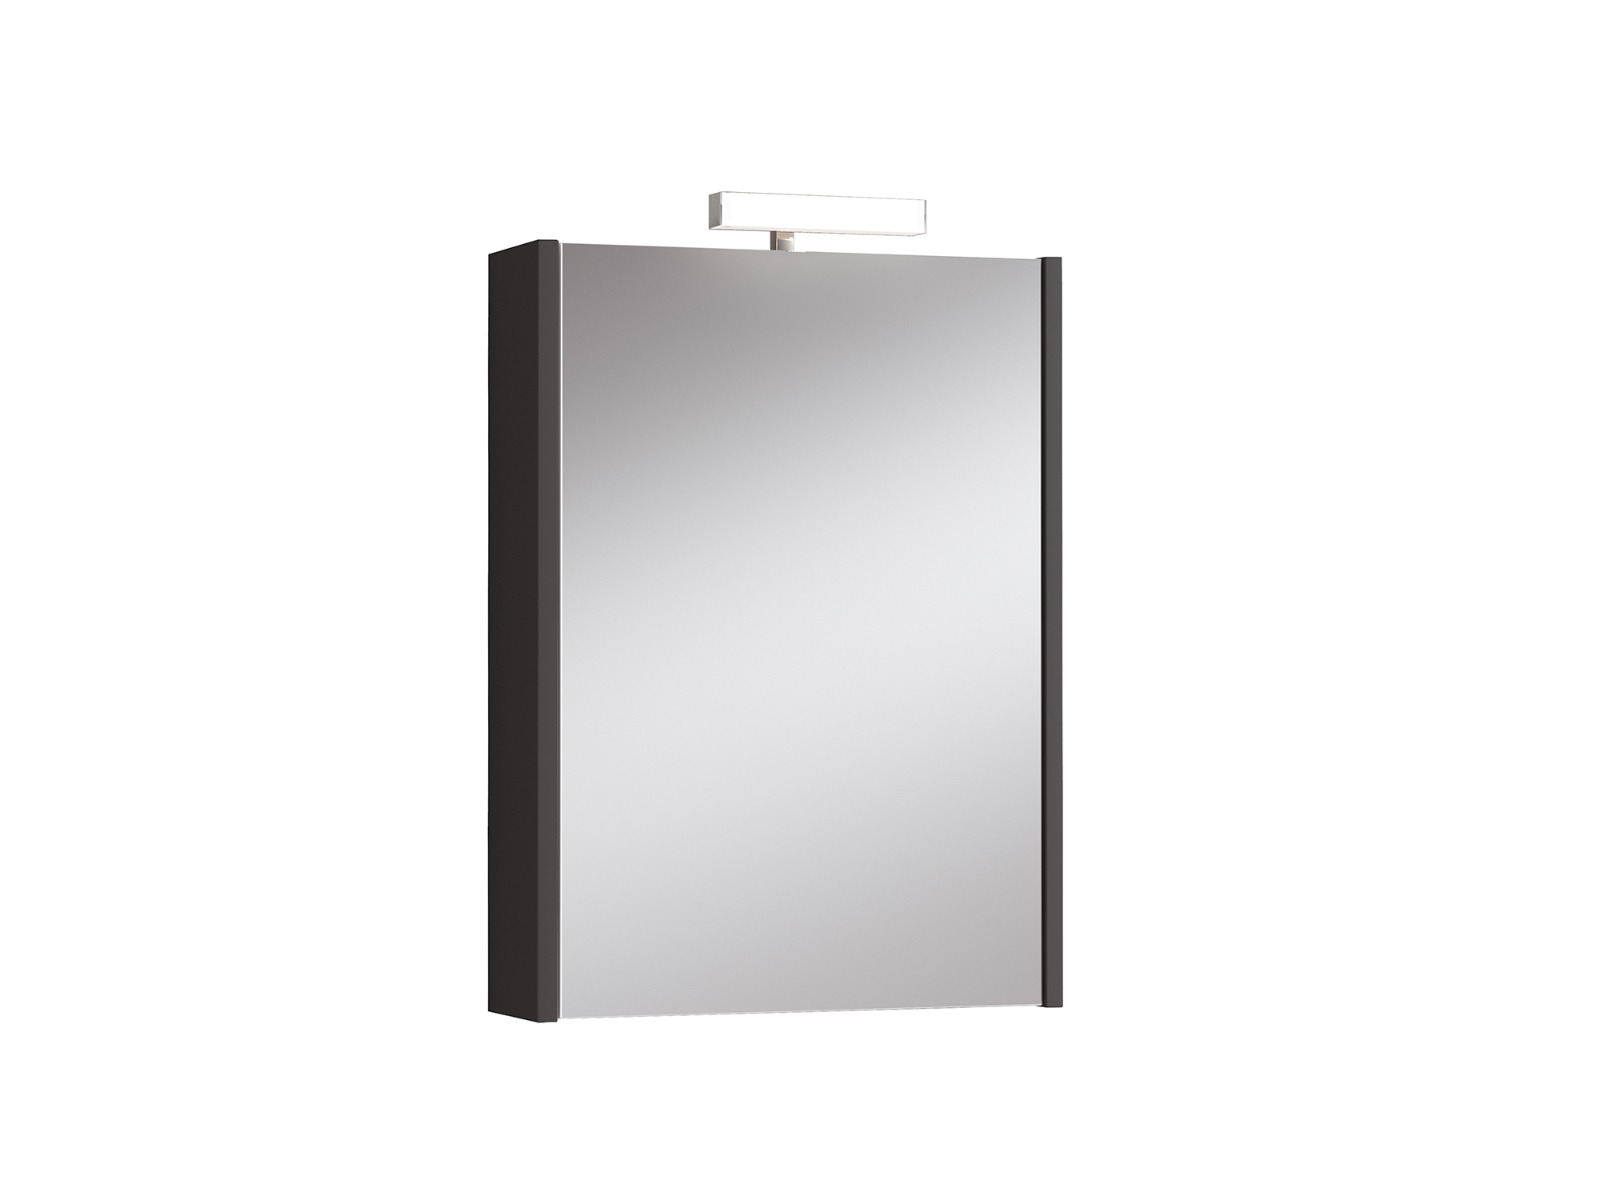 BATHROOM MIRROR COSMOS 60 ANTHRACITE GREY WITH LIGHT PICCADILLY